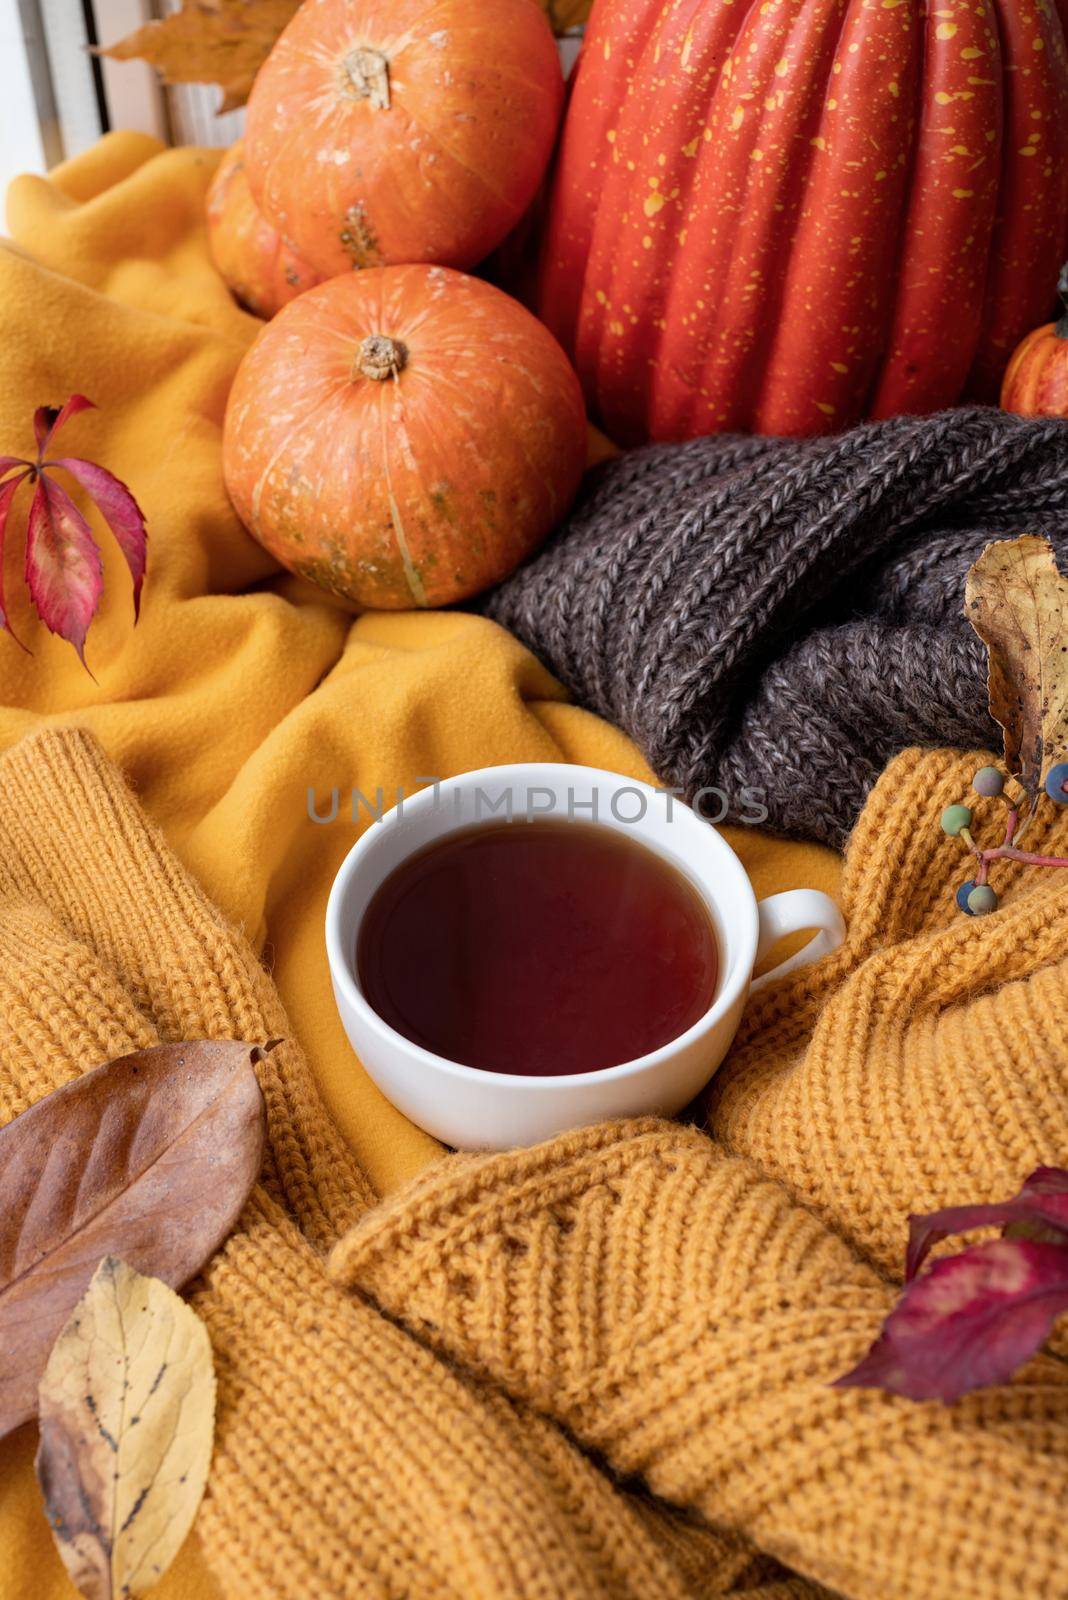 Hello fall. Cozy warm image. Cozy autumn composition, sweater weather. Pumpkins, hot tea and sweaters on window